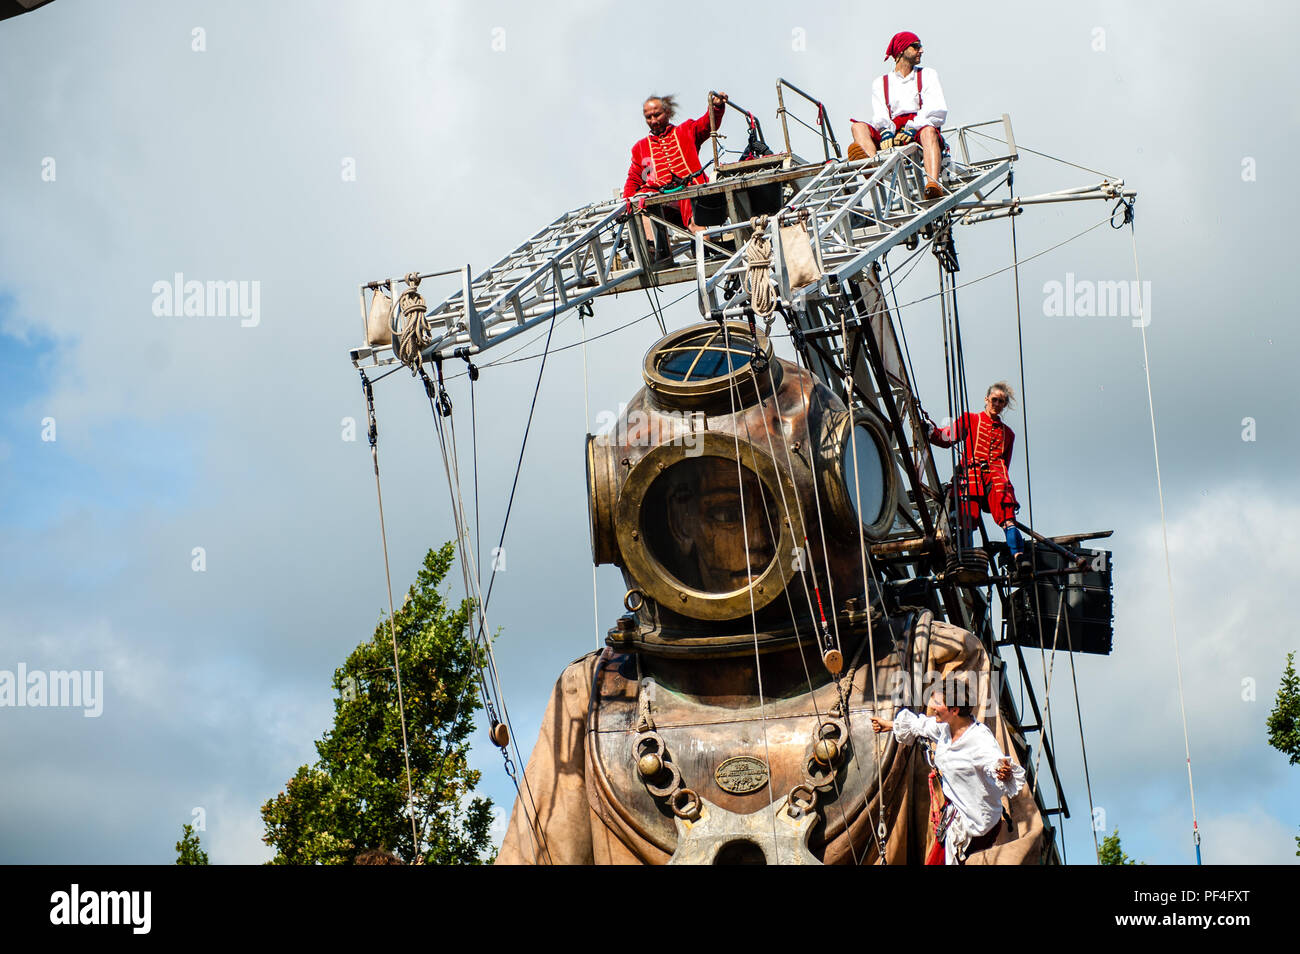 Leeuwarden, The Netherlands, 18th August, 2018. The world-famous production of Royal de Luxe makes its Dutch premiere in the European Capital of Culture. These towering giants walk the streets of Leeuwarden and provide an unforgettable experience with their 'Big Skate in the Ice' show. Royal de Luxe is an extraordinary street theatre company.  Twenty people are needed to make her move and she is Credit: Ricardo Hernandez/Alamy Live News Stock Photo